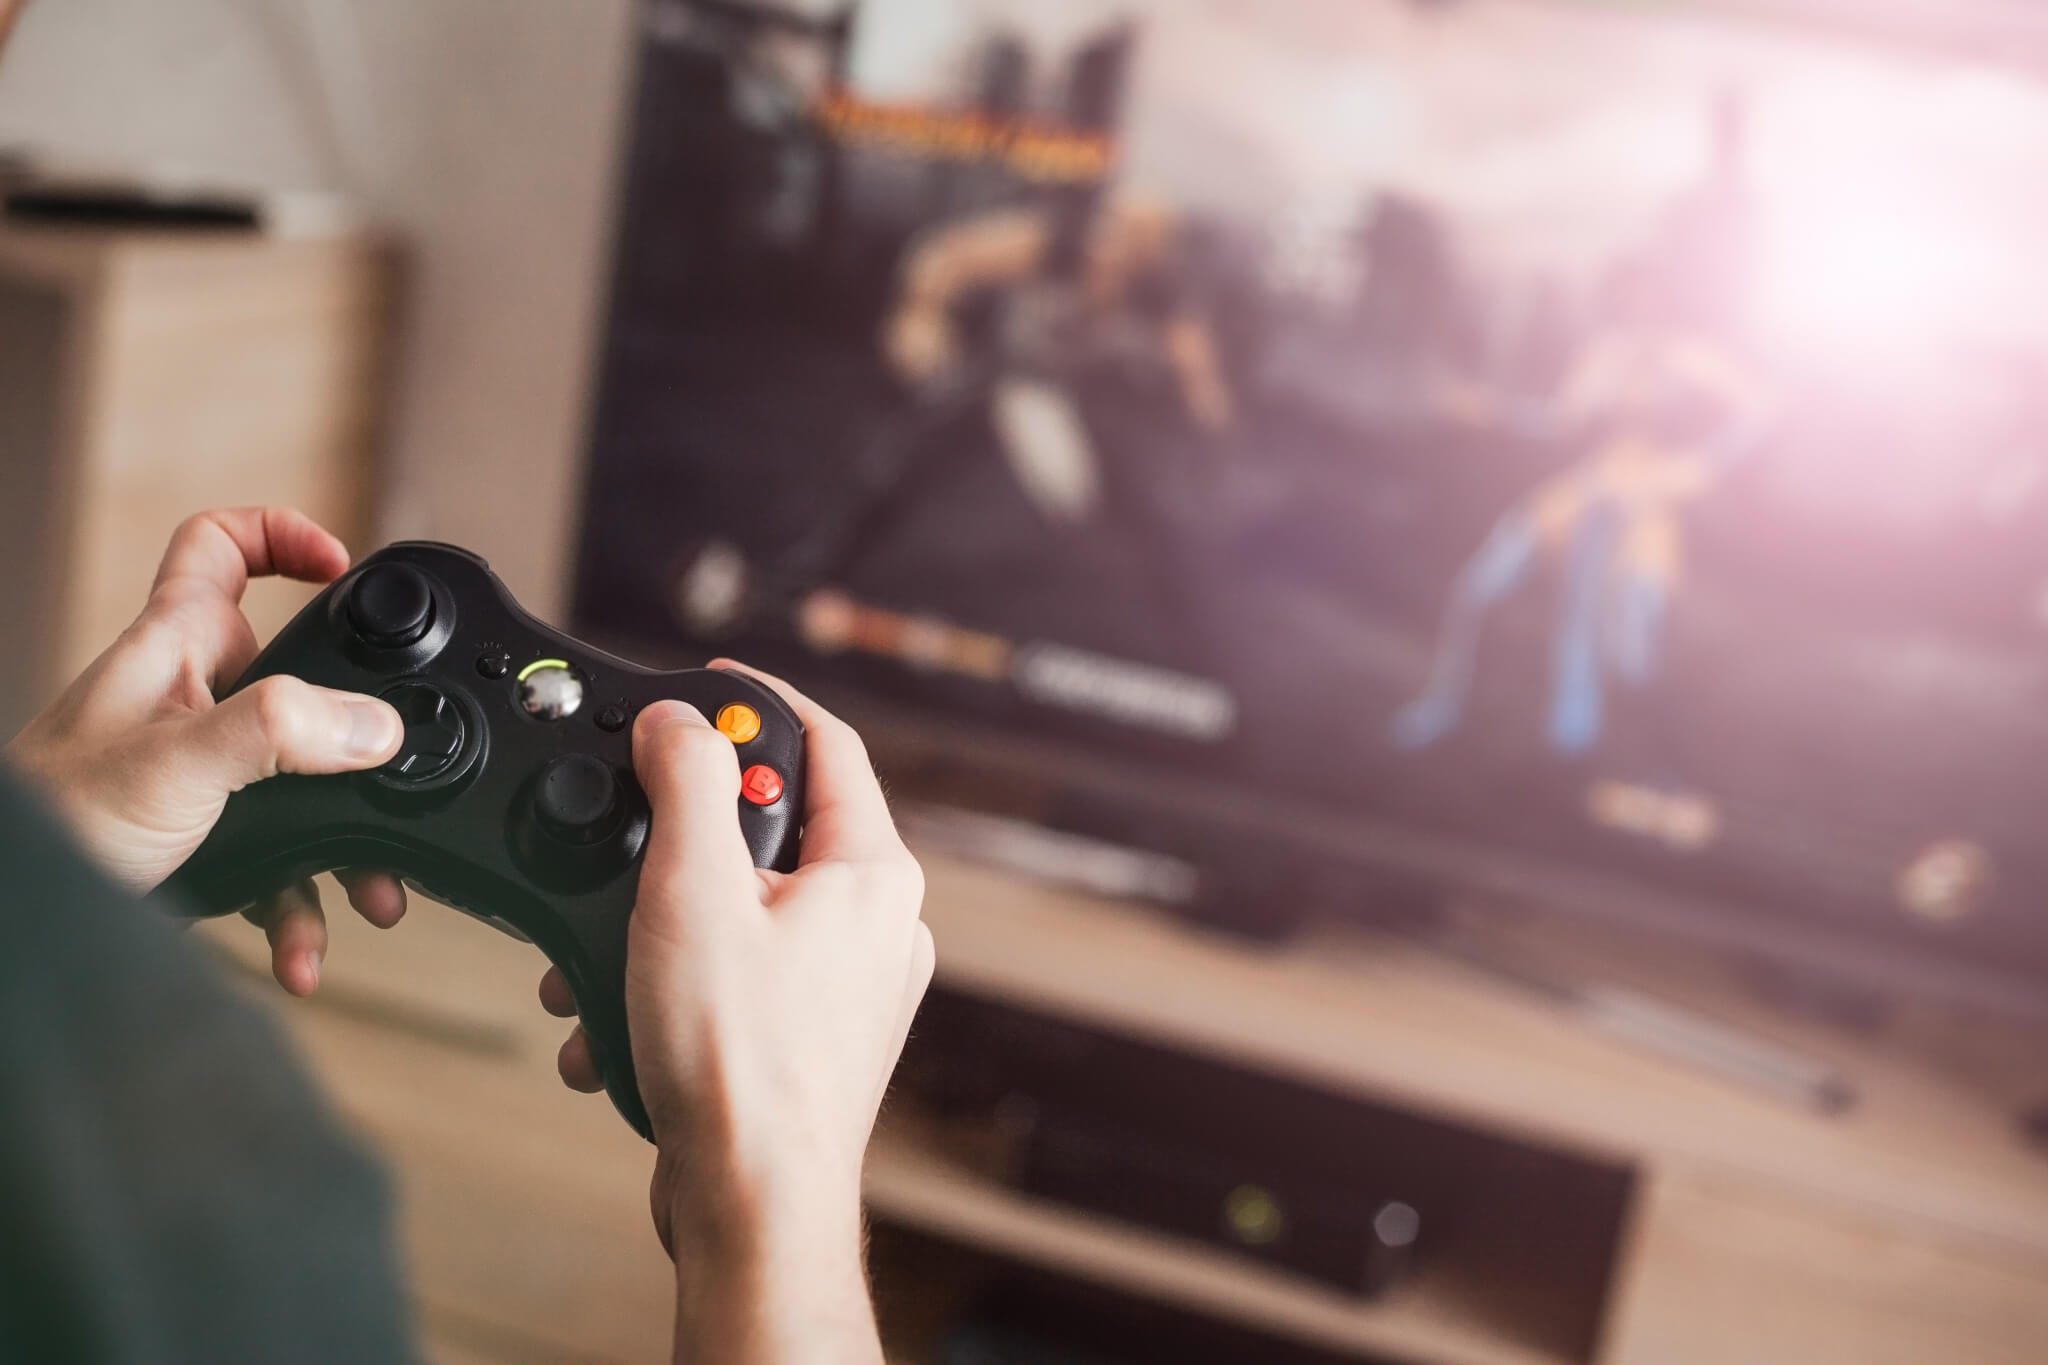 Online gaming may boost school grades: study